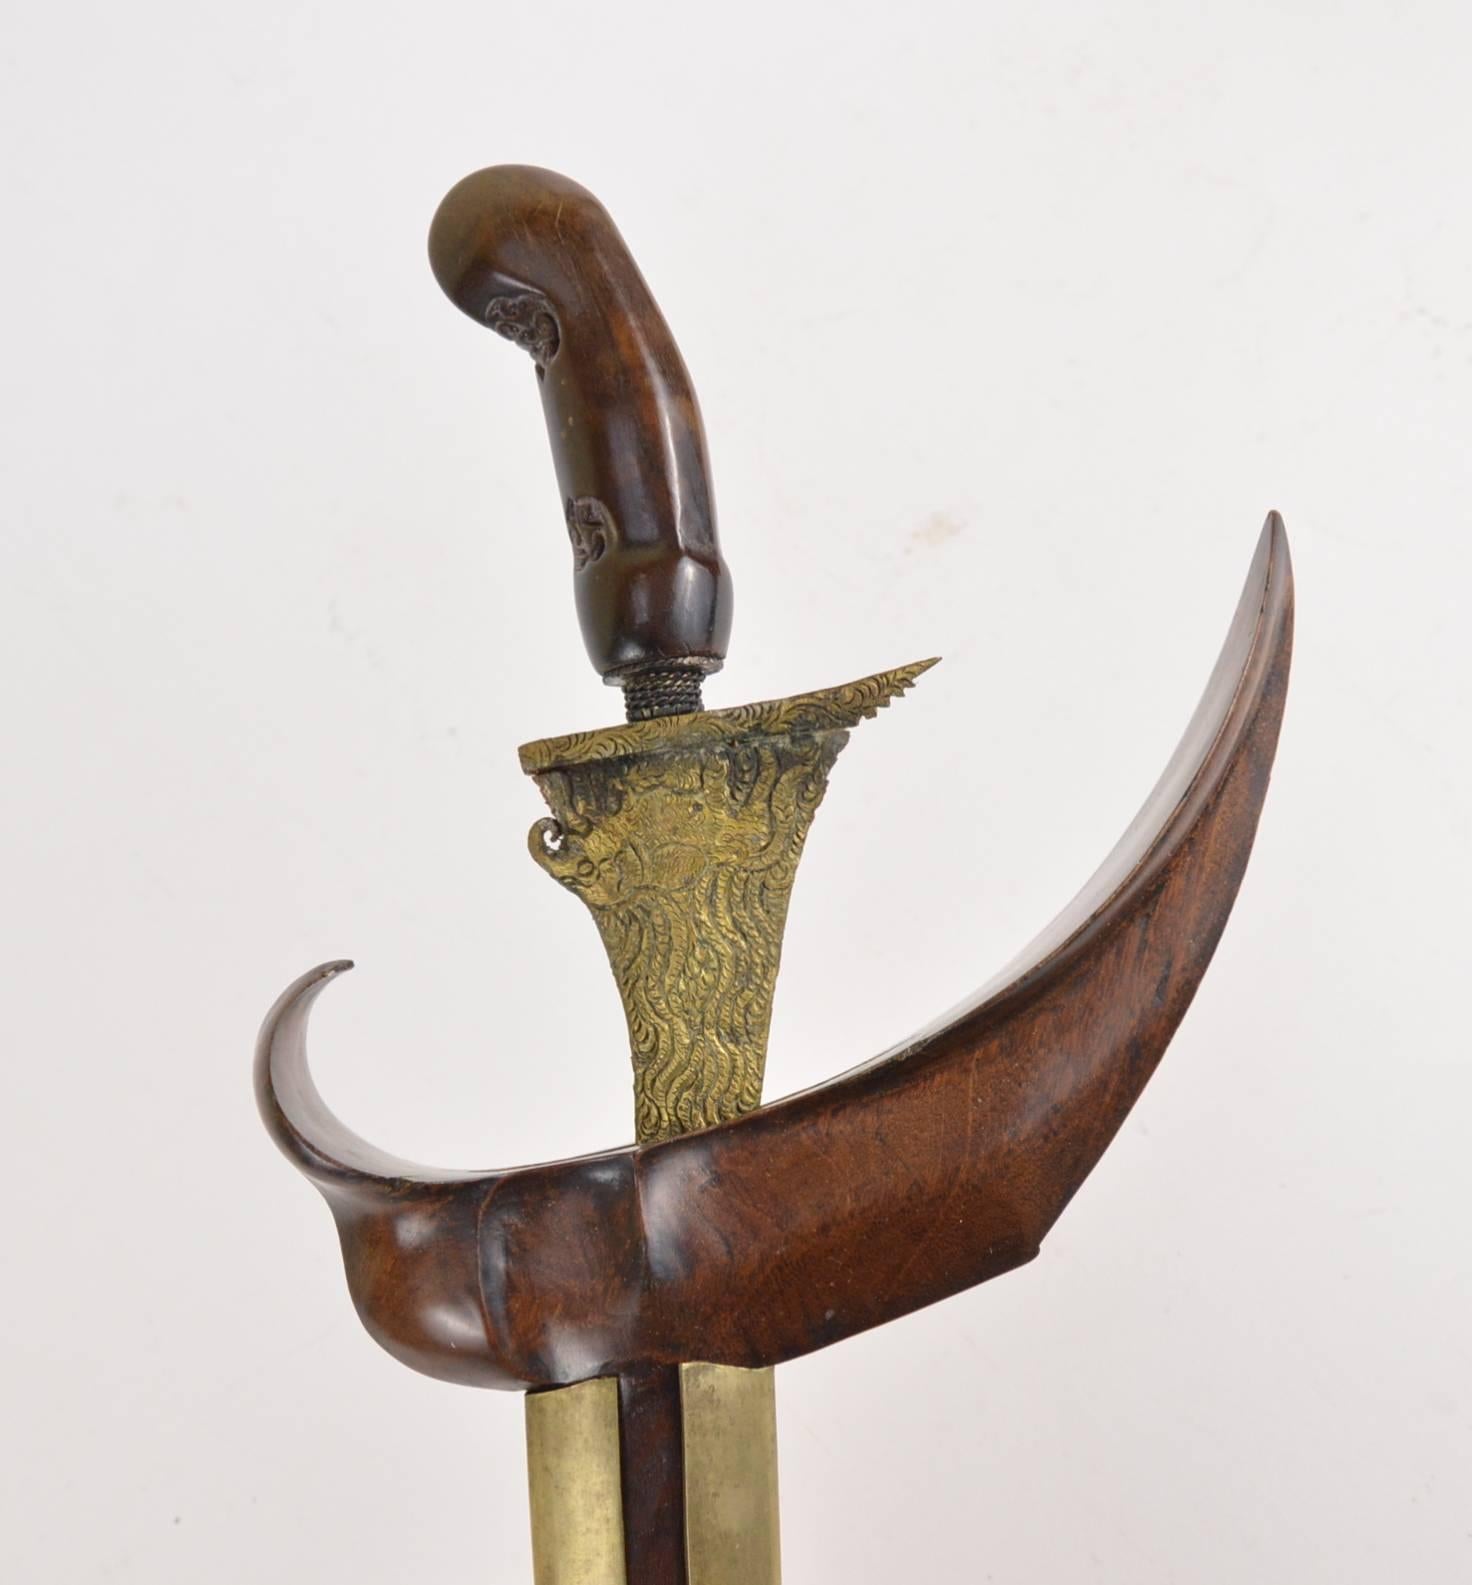 Antique Indonesian Kris dagger with wooden handle.
 